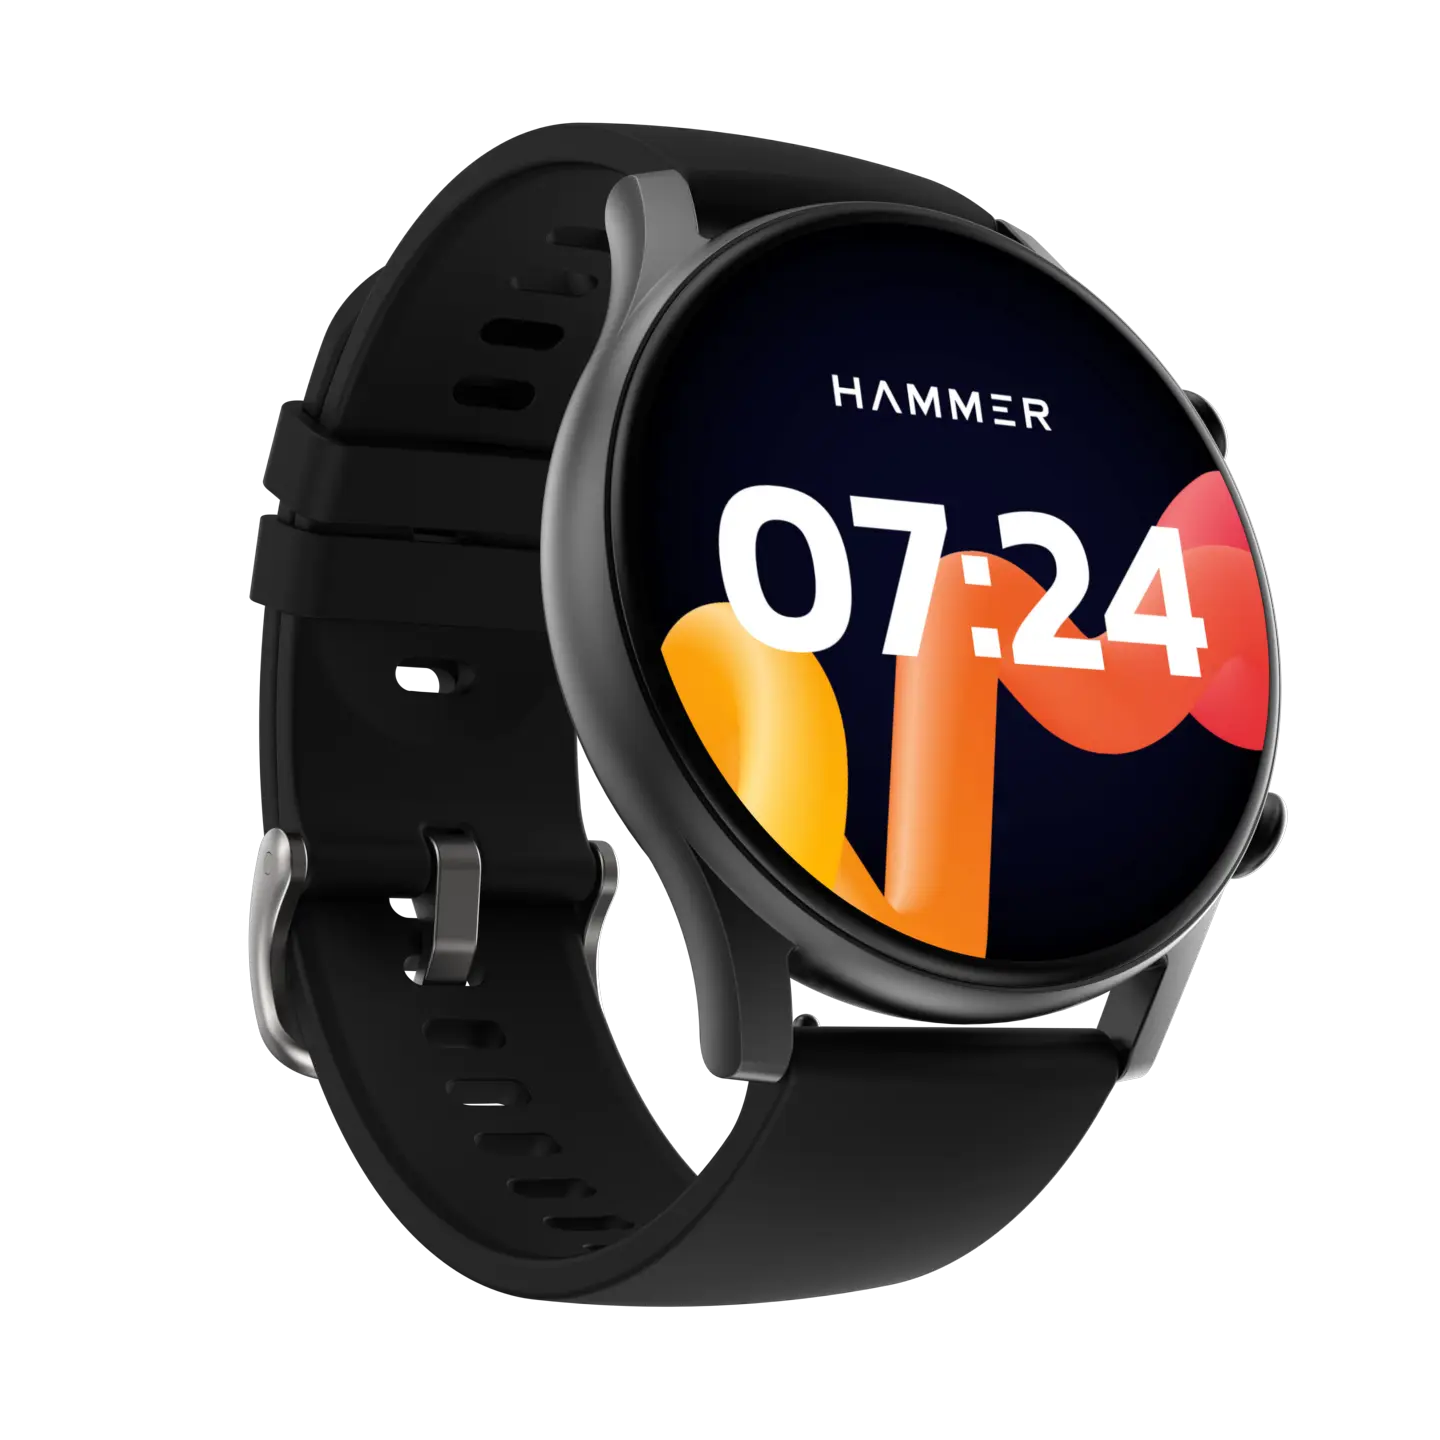 Hammer Glide 1.43 Amoled Round Dial Smart Watch With Bluetooth Calling